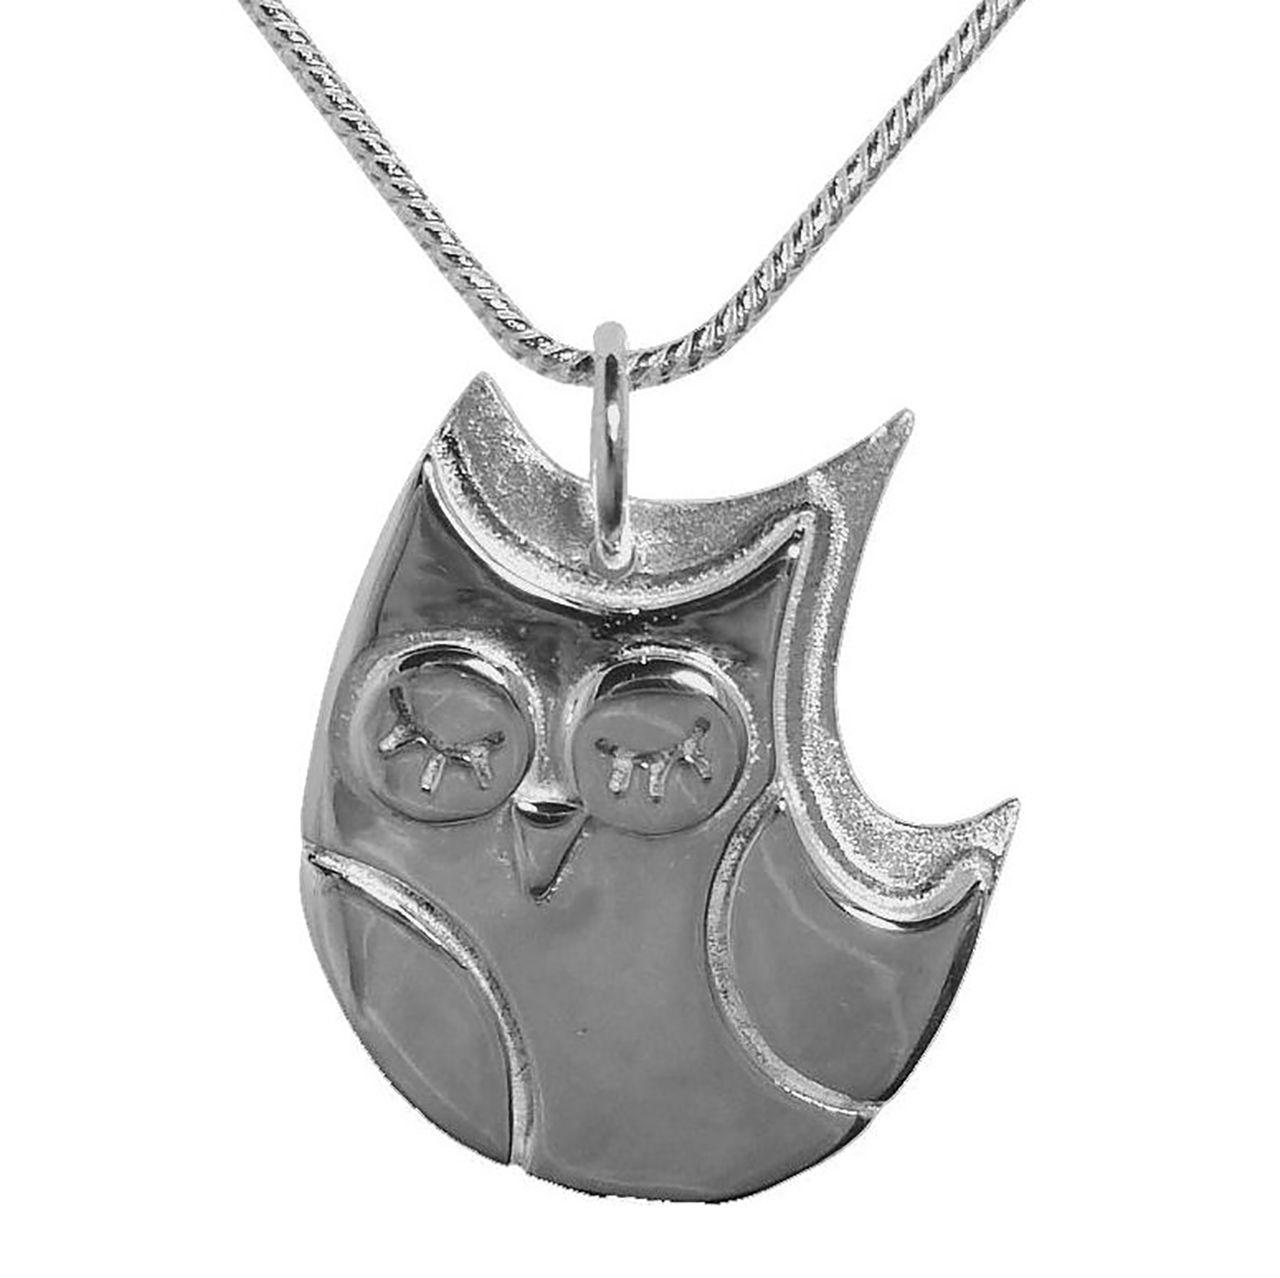 Silver Plated Owl Necklace